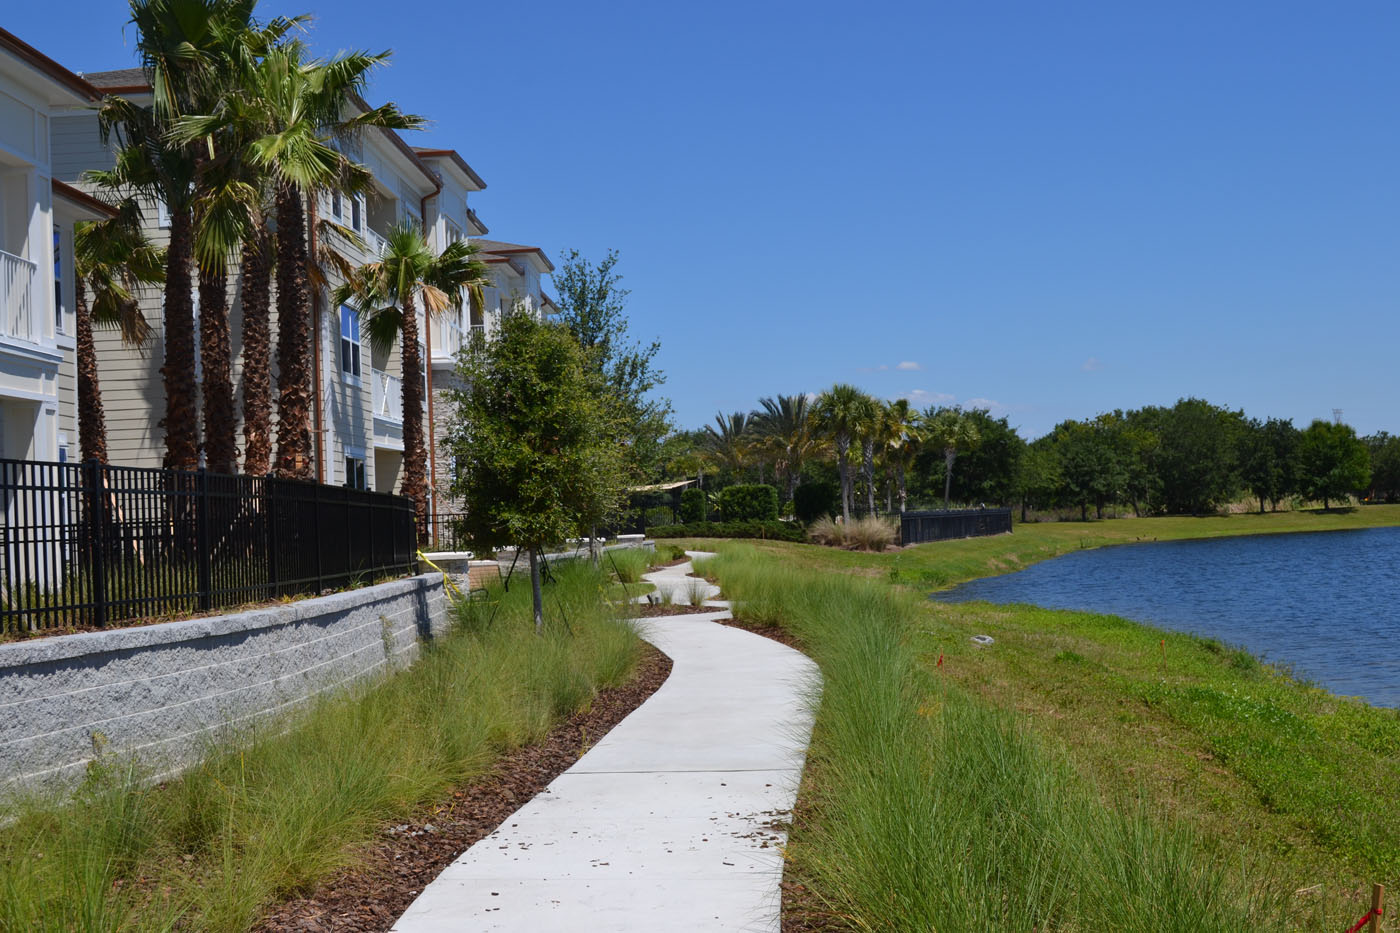 Highland Park Apartments pathway near water